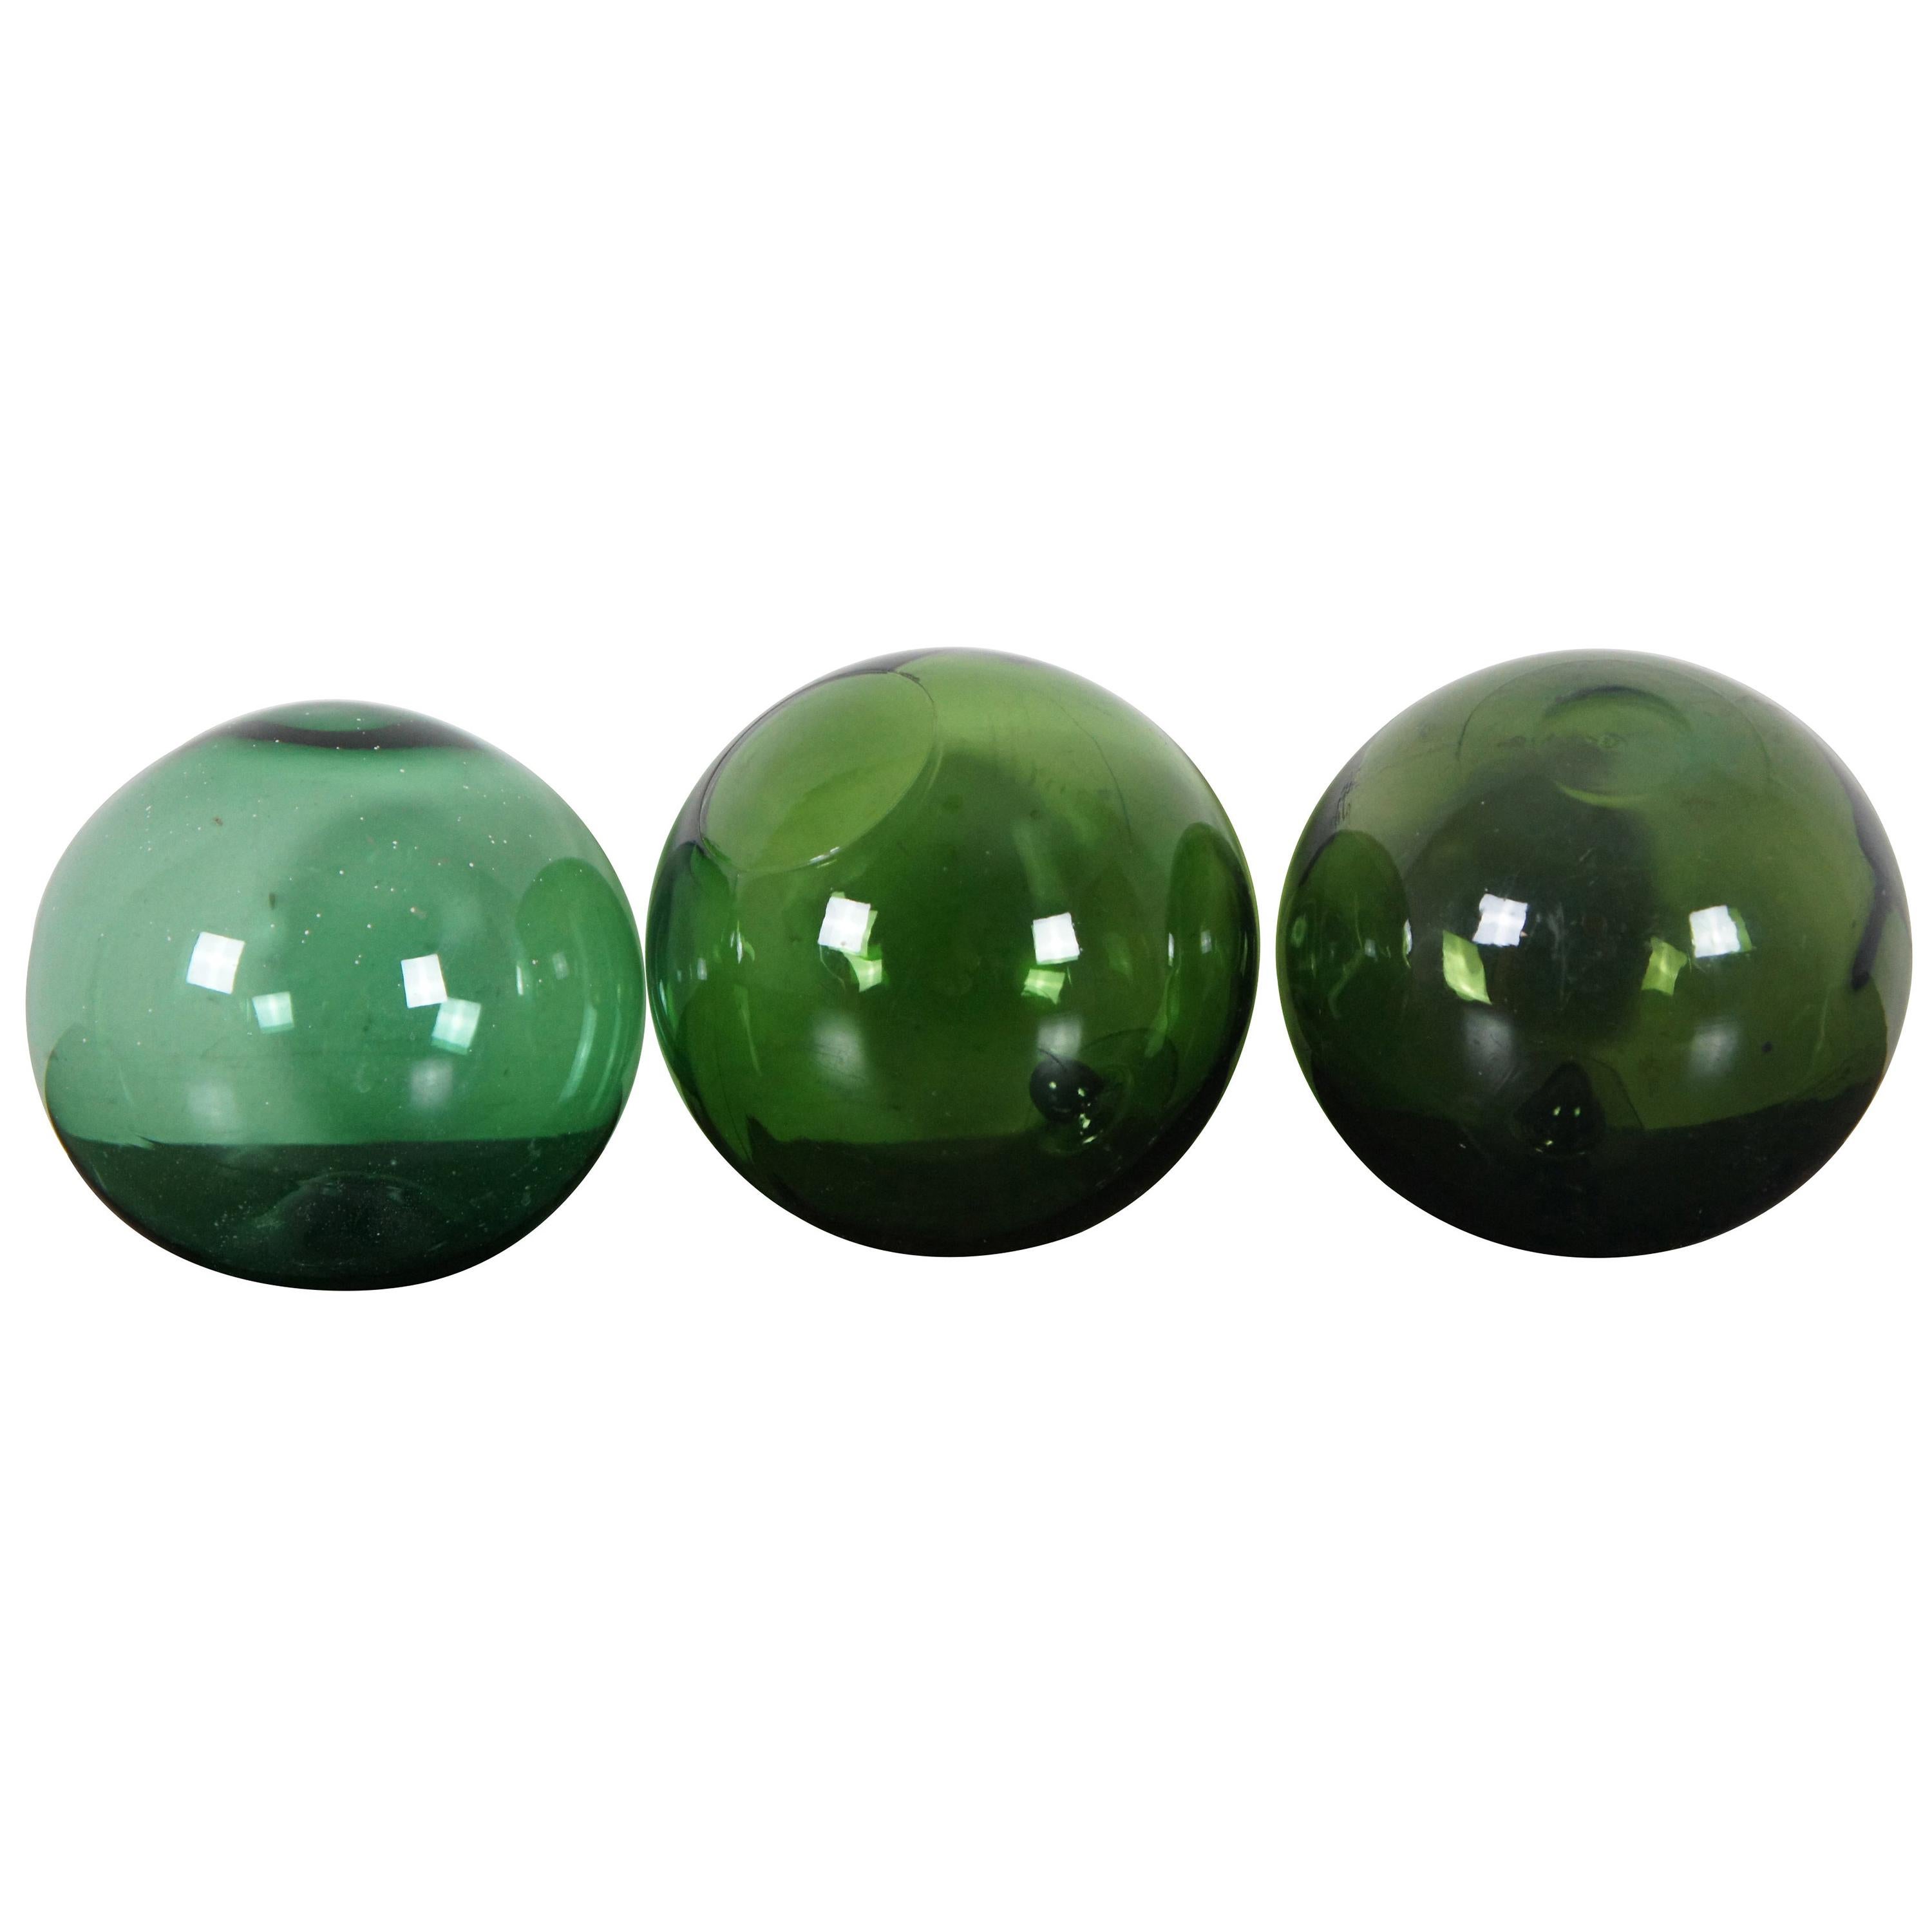 3 Vintage Green Japanese Blown Glass Fishing Floats Nautical Buoy Marker